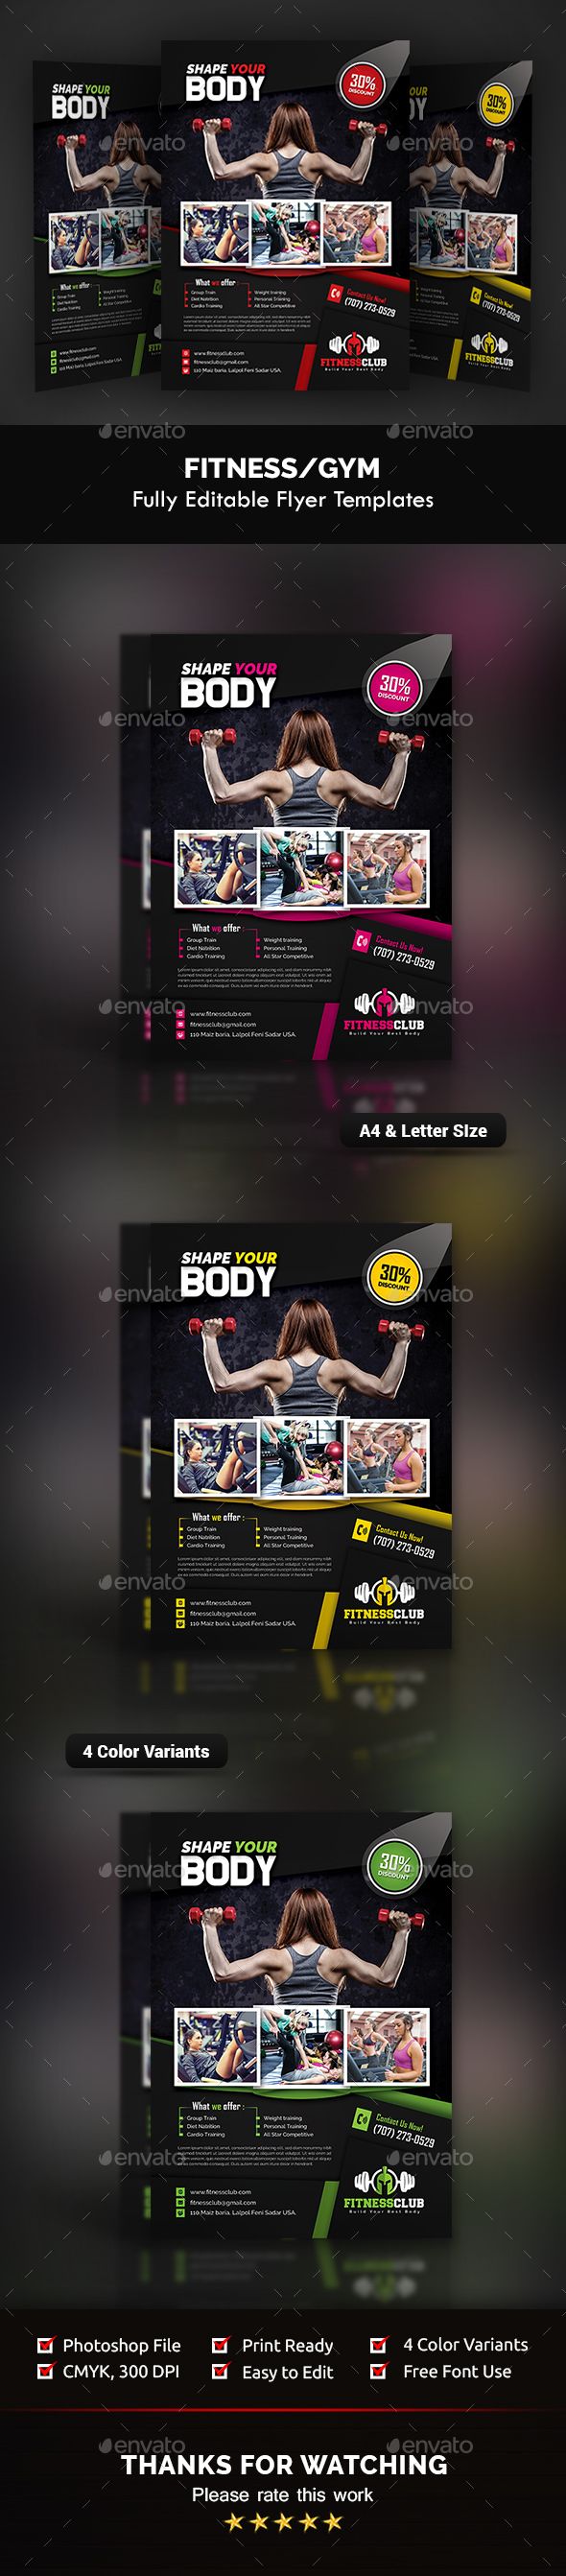 Healthcare-Advertising-FitnessGym-Flyer-Templates-Sports-Events Healthcare Advertising : #Fitness/Gym #Flyer Templates - Sports Events